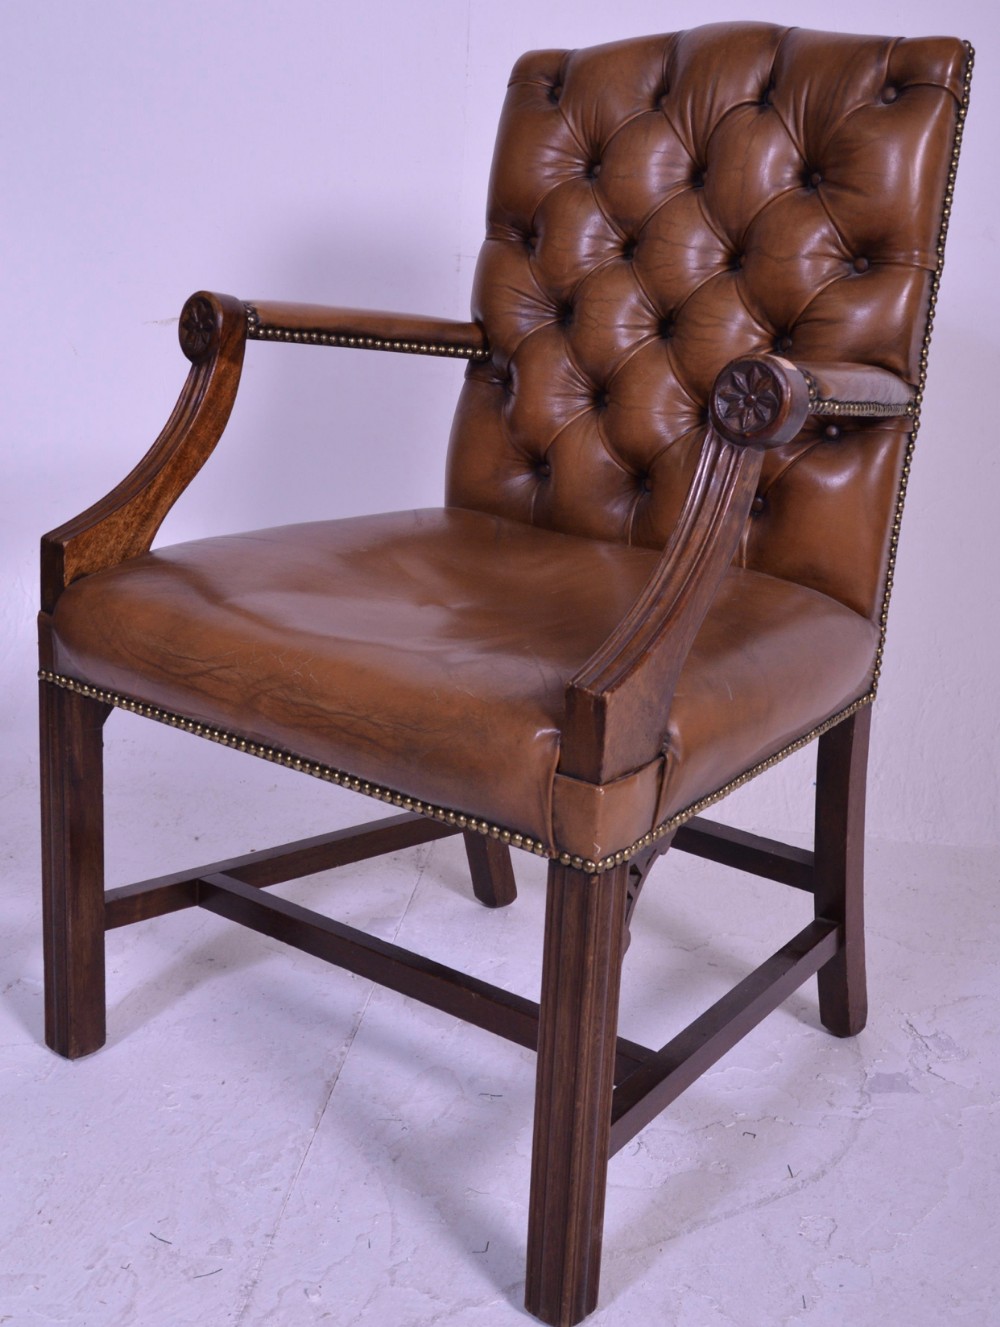 1930s leather covered deep buttoned gainsborough chair